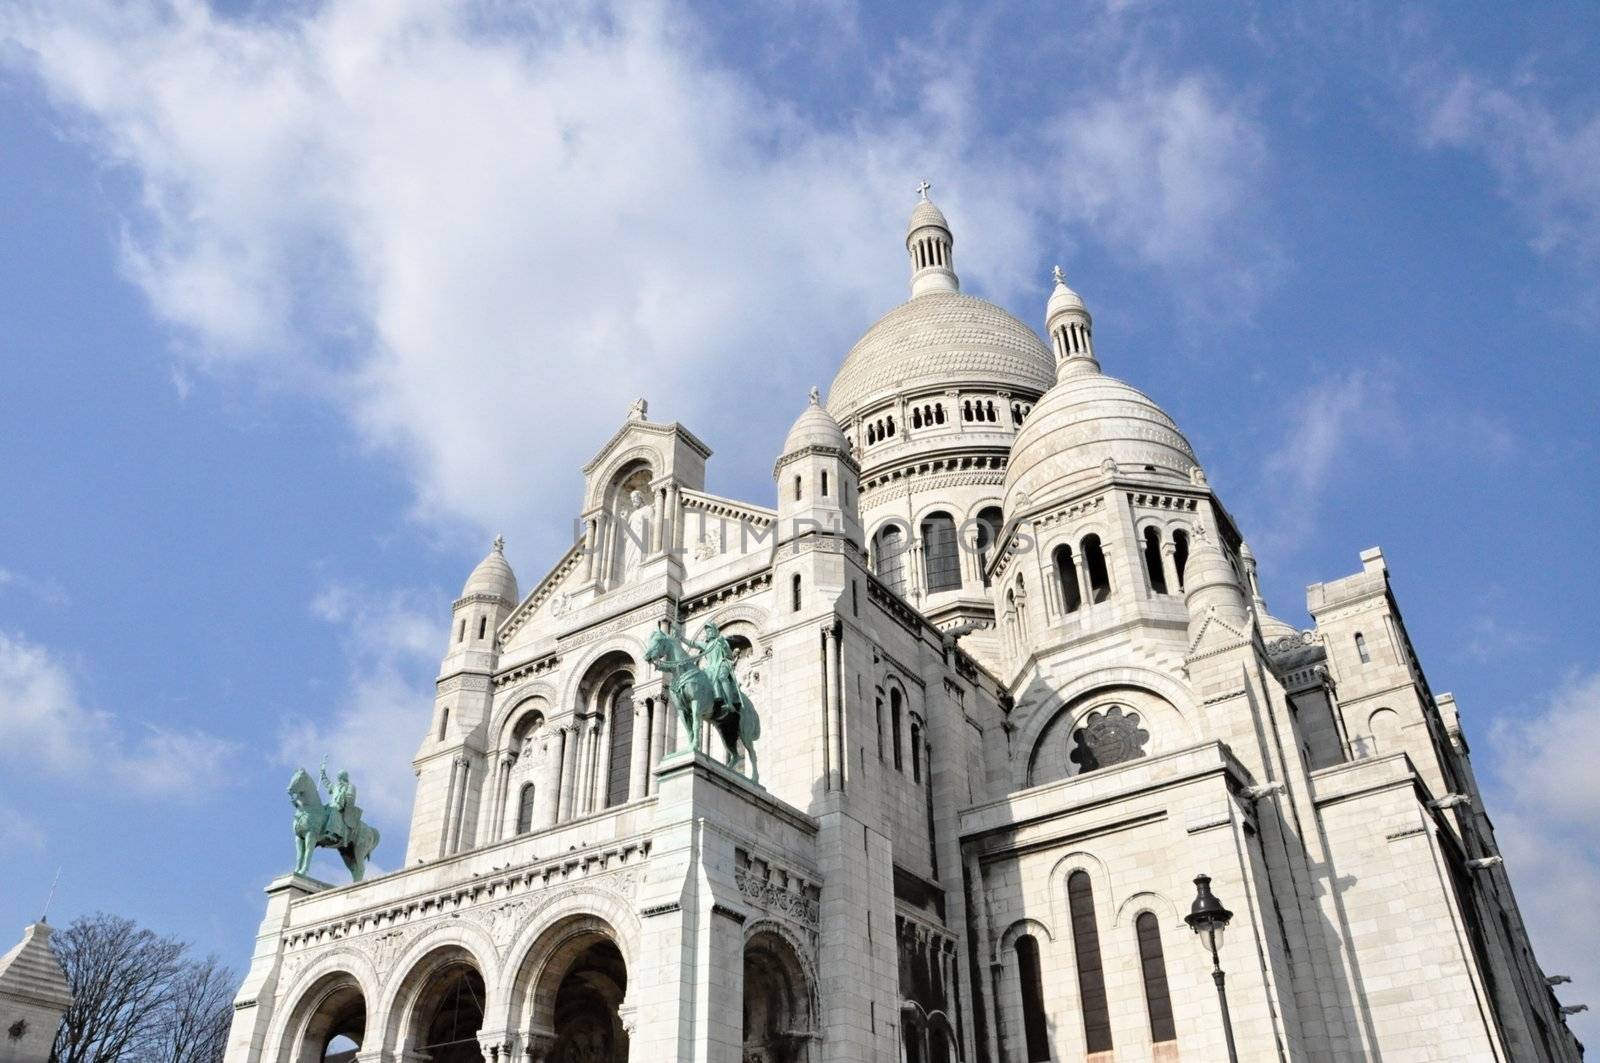 The Basilica of the Sacred Heart of Jesus of Paris, commonly known as Sacr�-Coeur Basilica